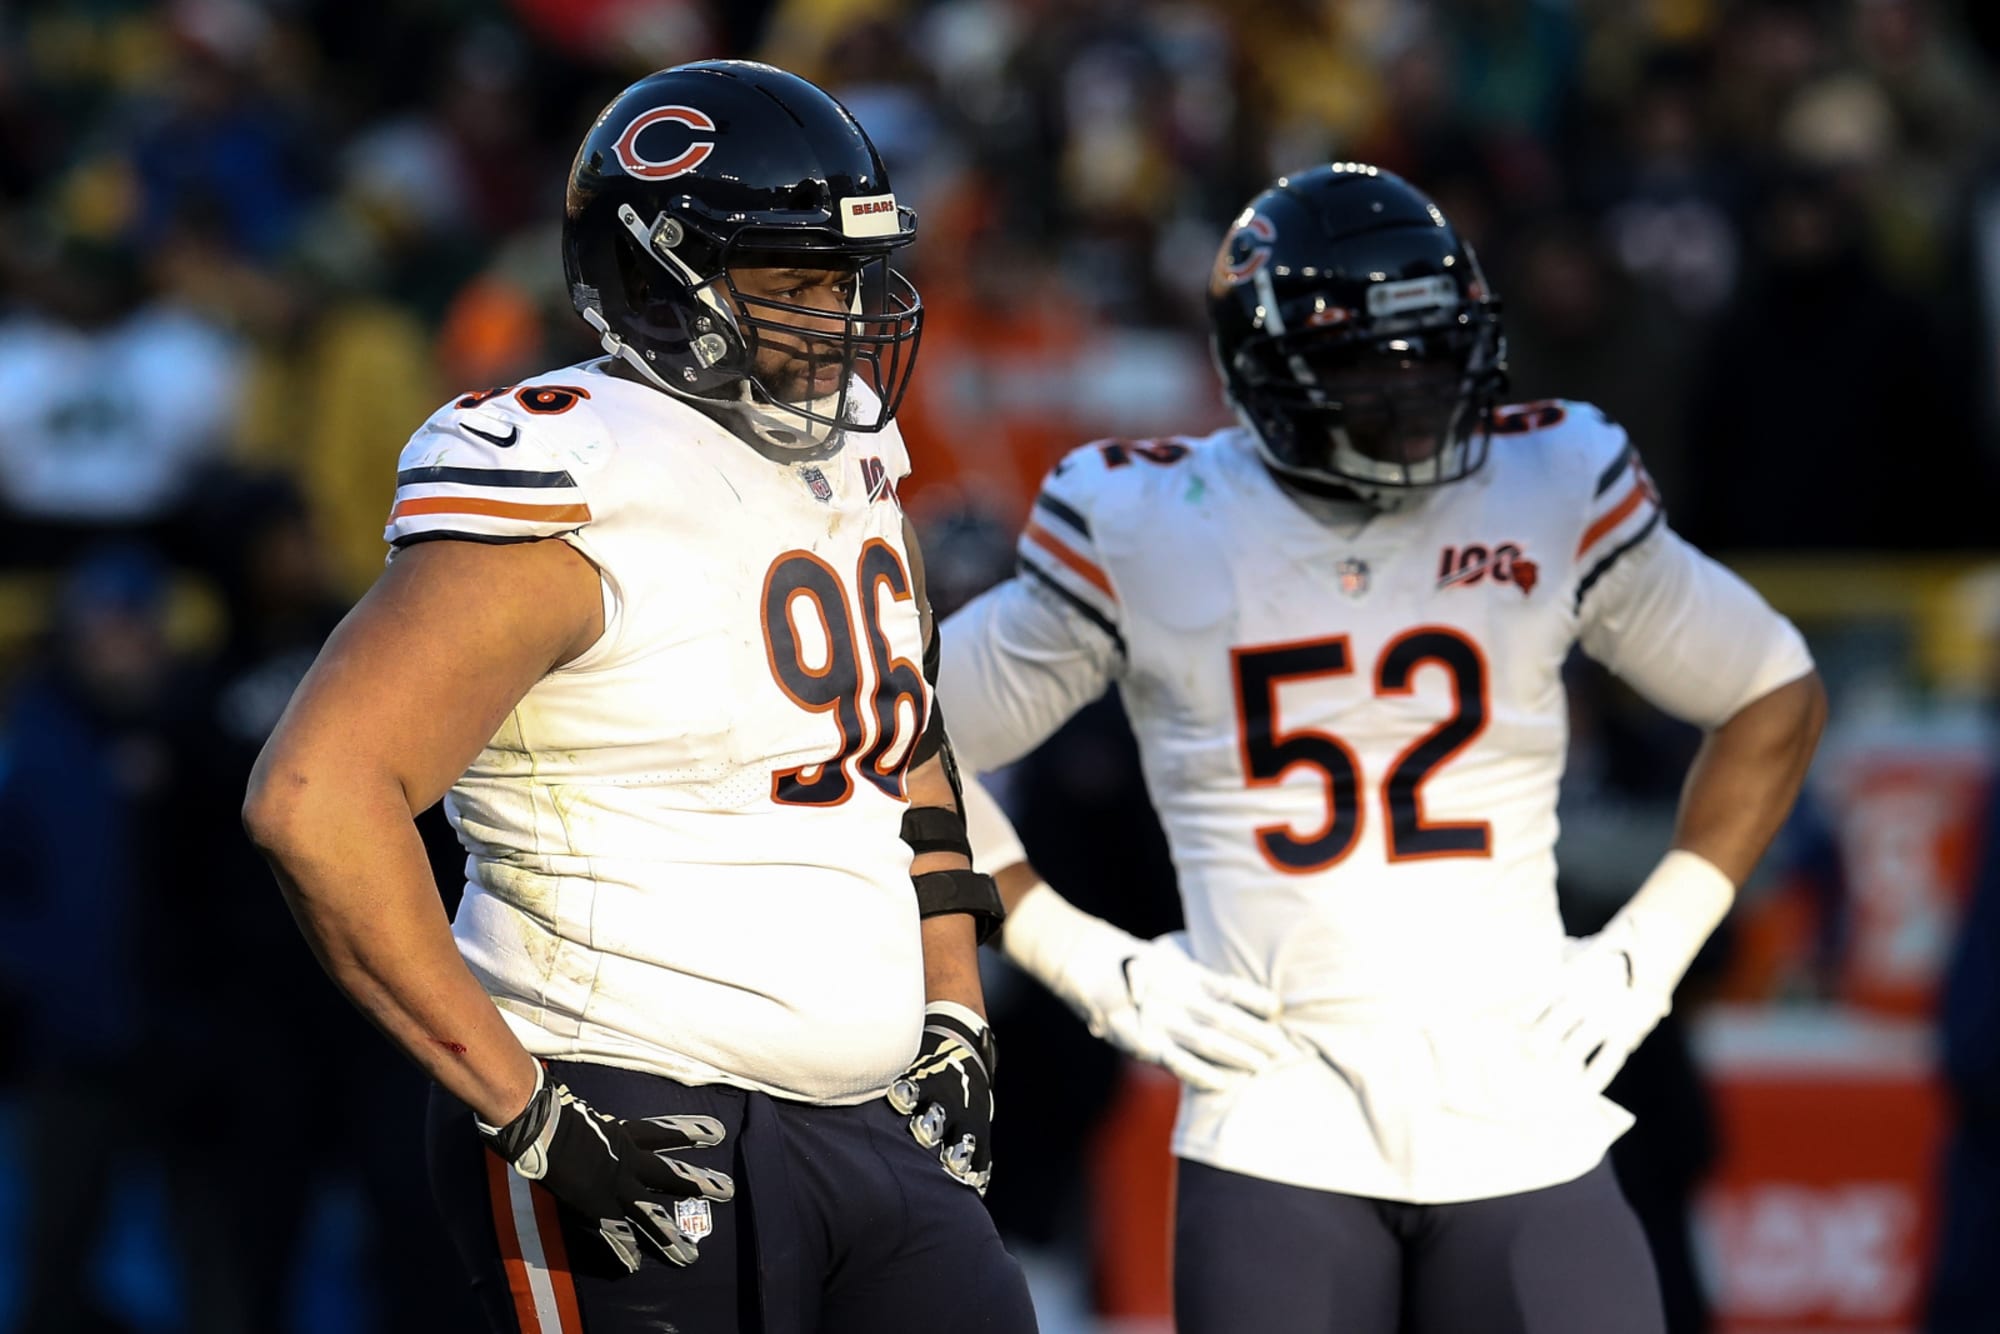 Chicago Bears Official depth chart brings intrigue, questions